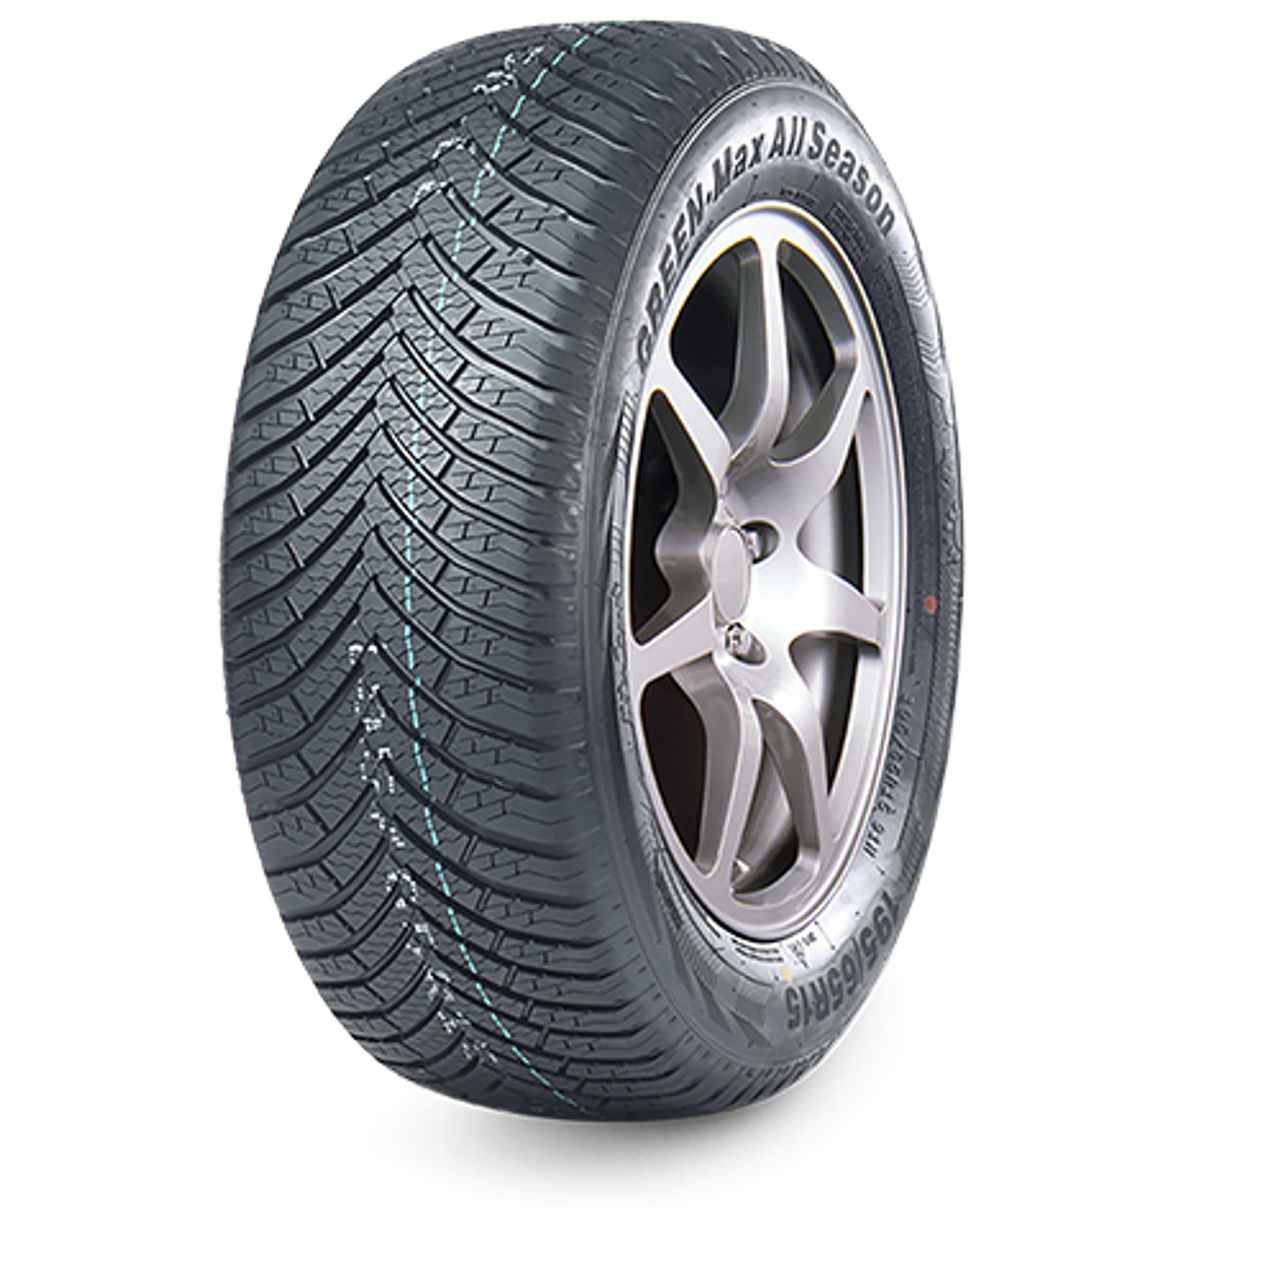 LINGLONG GREEN-MAX ALL SEASON 175/80R14 88T BSW